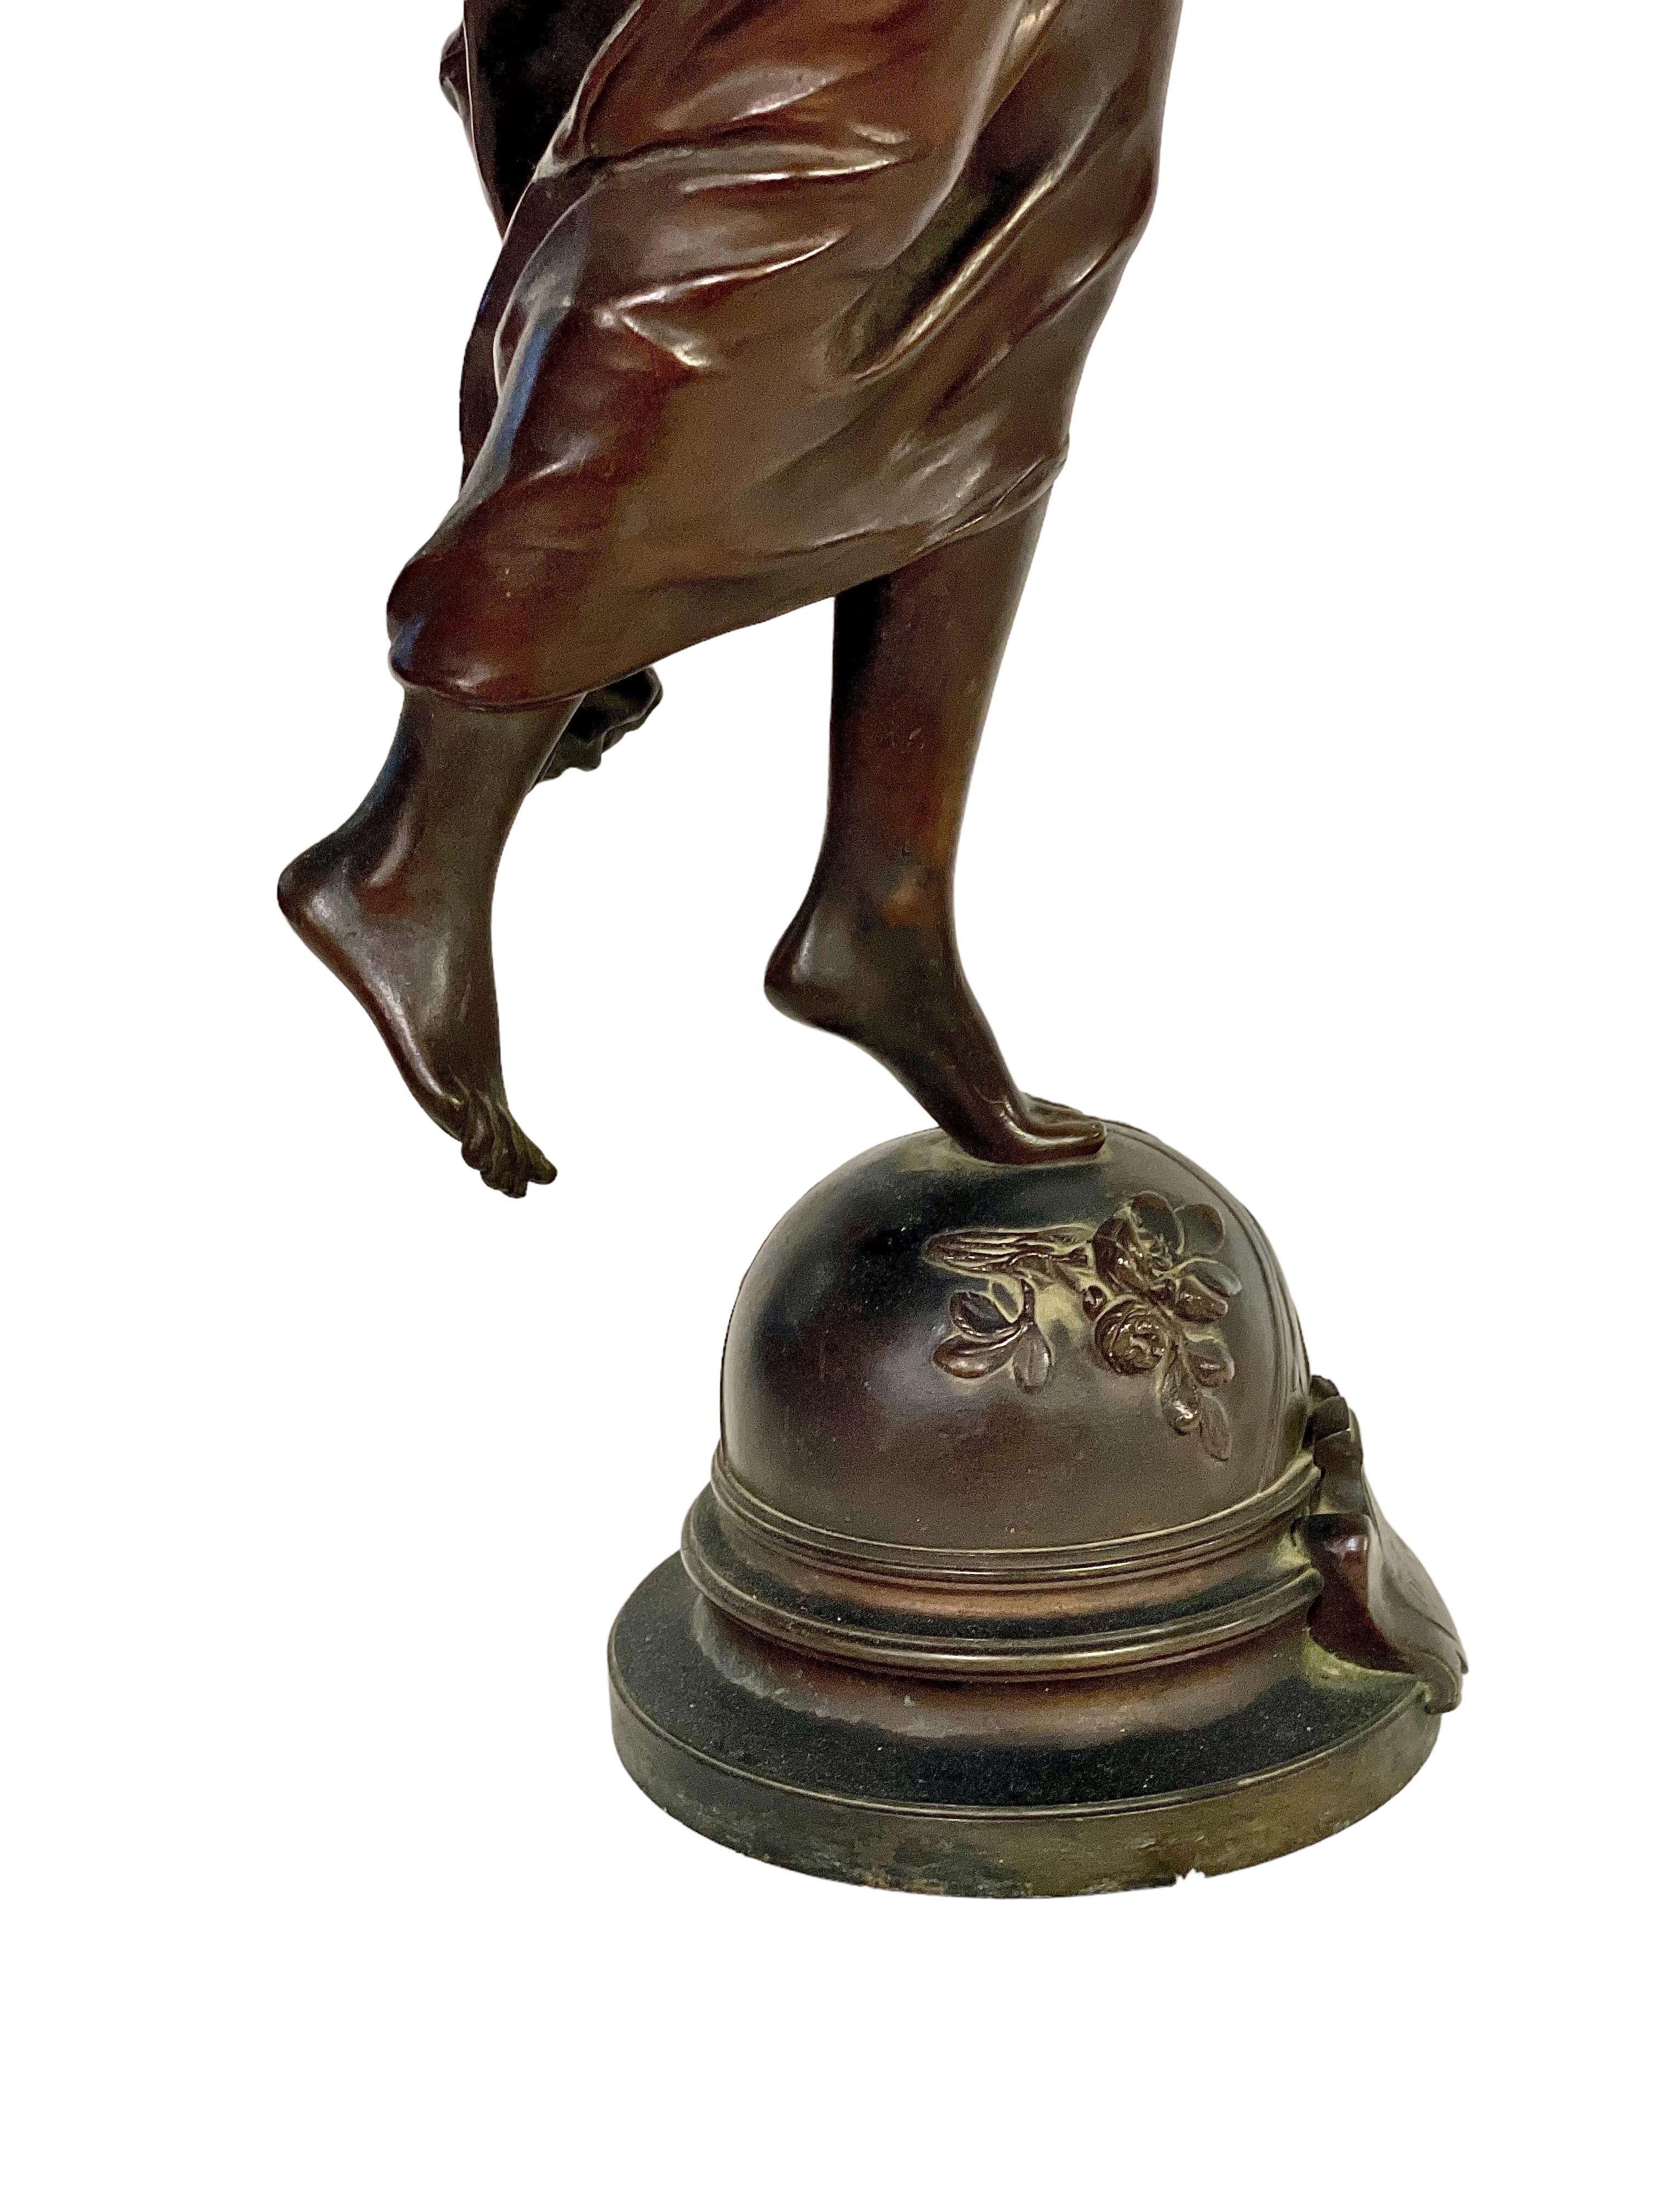 By Adrien Gaudez 19th Century Tall French Bronze Sculpture, 'L'Etoile Du Matin'  For Sale 5